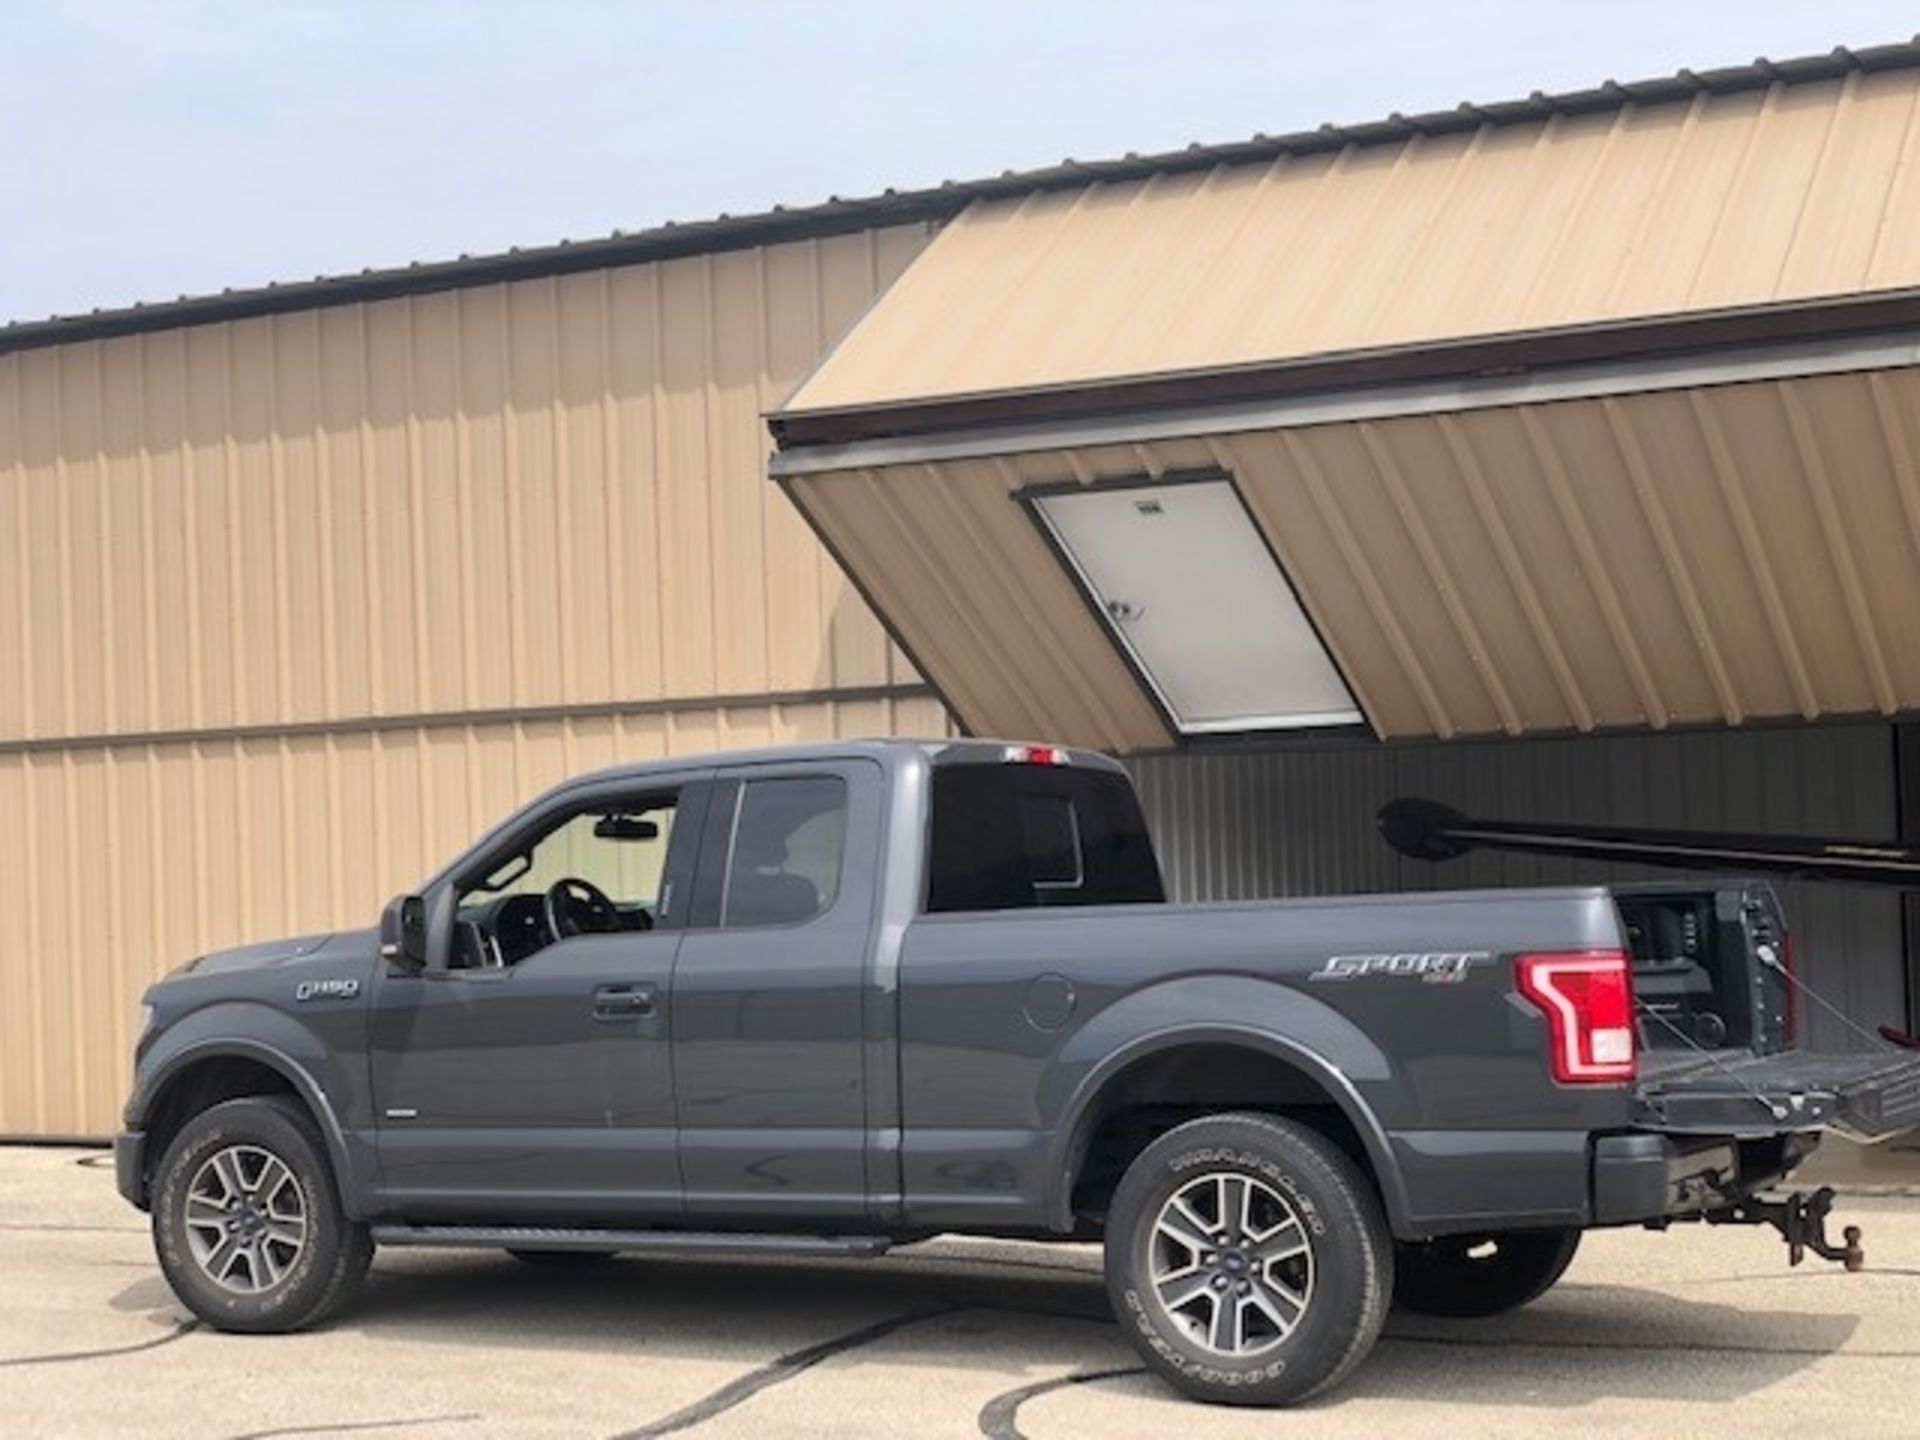 2016 Ford F-150 4X4 Supercab Pick Up Truck, VIN 1FTEX1EP5GFA36576, ( 43,000 Indicated Miles) Located